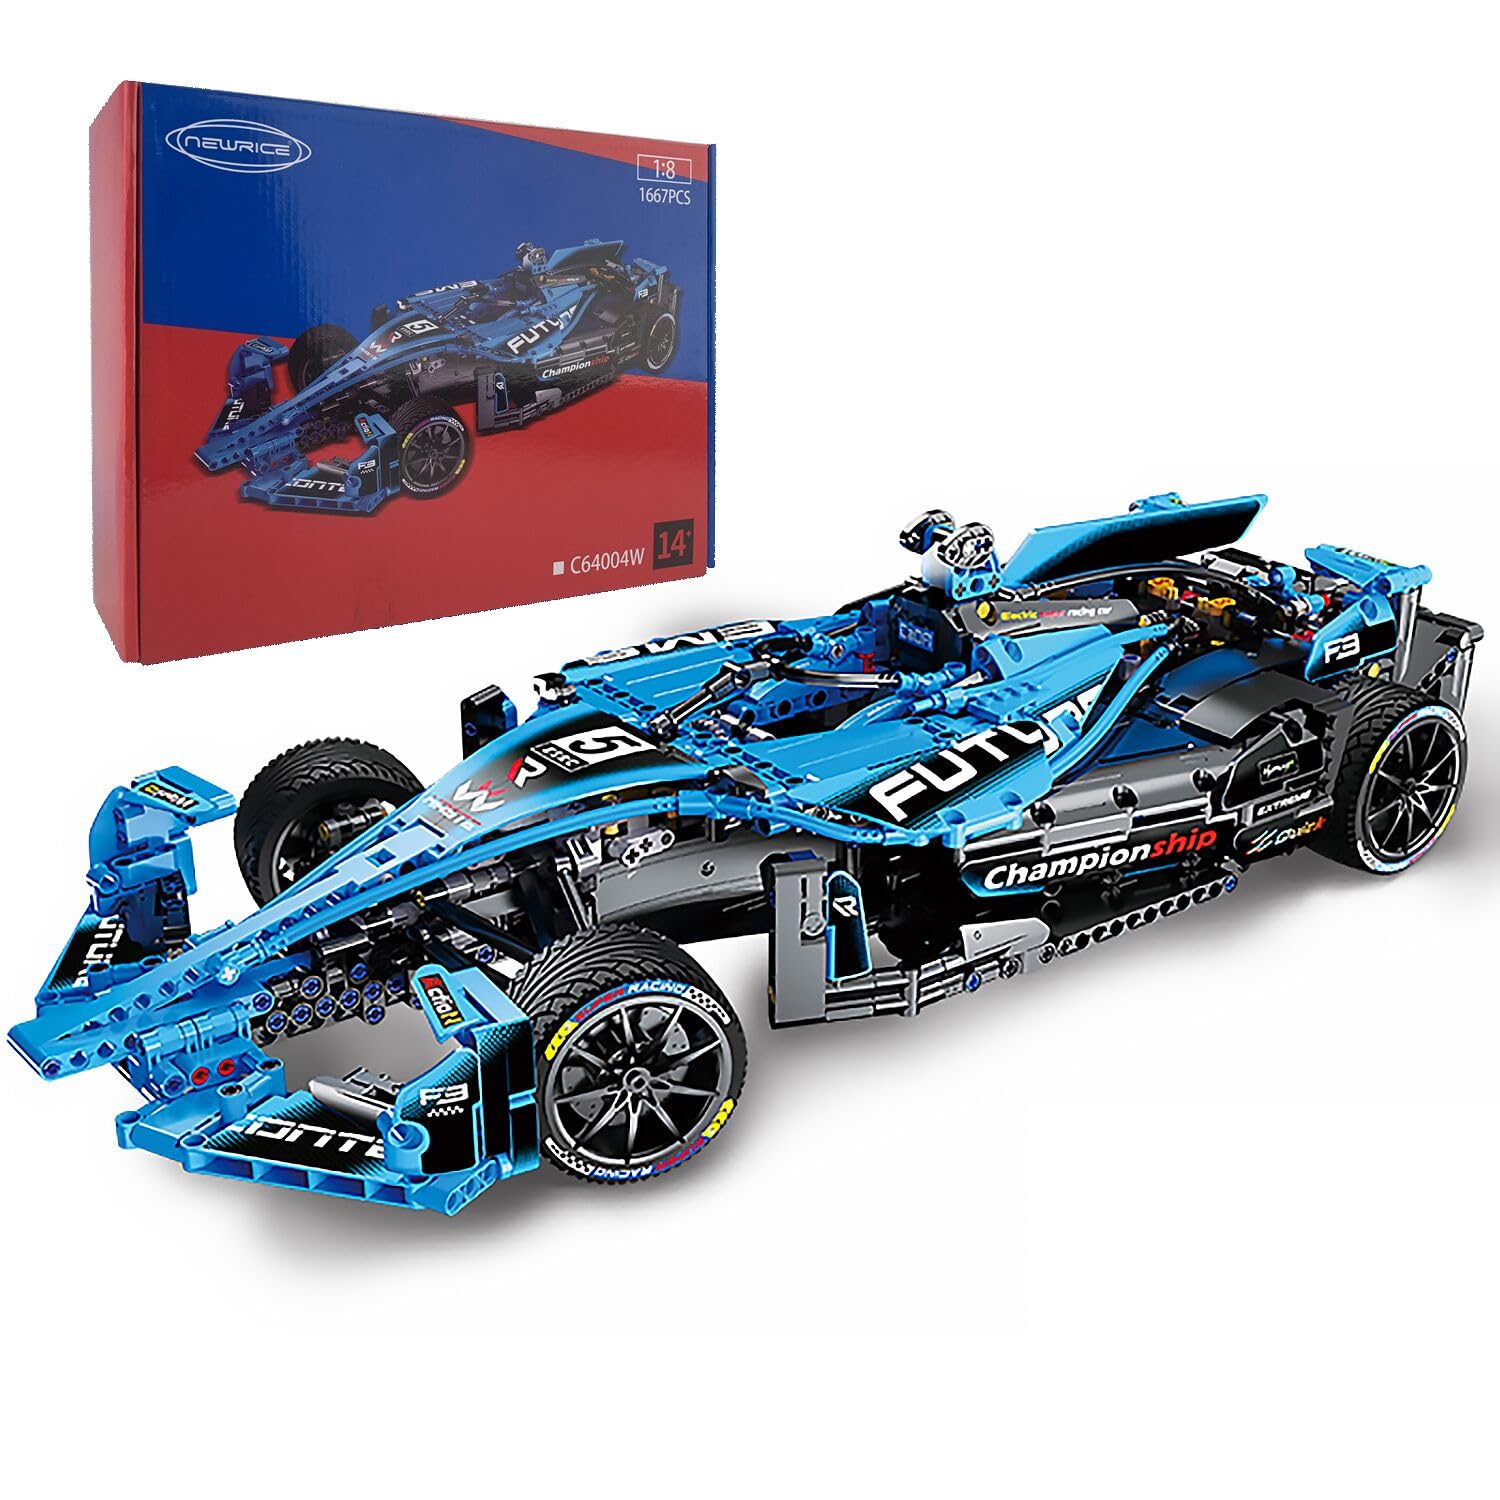 NEWRICE Formula 1 Racing Car Building Blocks Kit,MOC 1:8 Scale Model Car, Collectible Sports Car Toys,for 14+ Year Boys.Adult.New 2022(1667 Pieces)